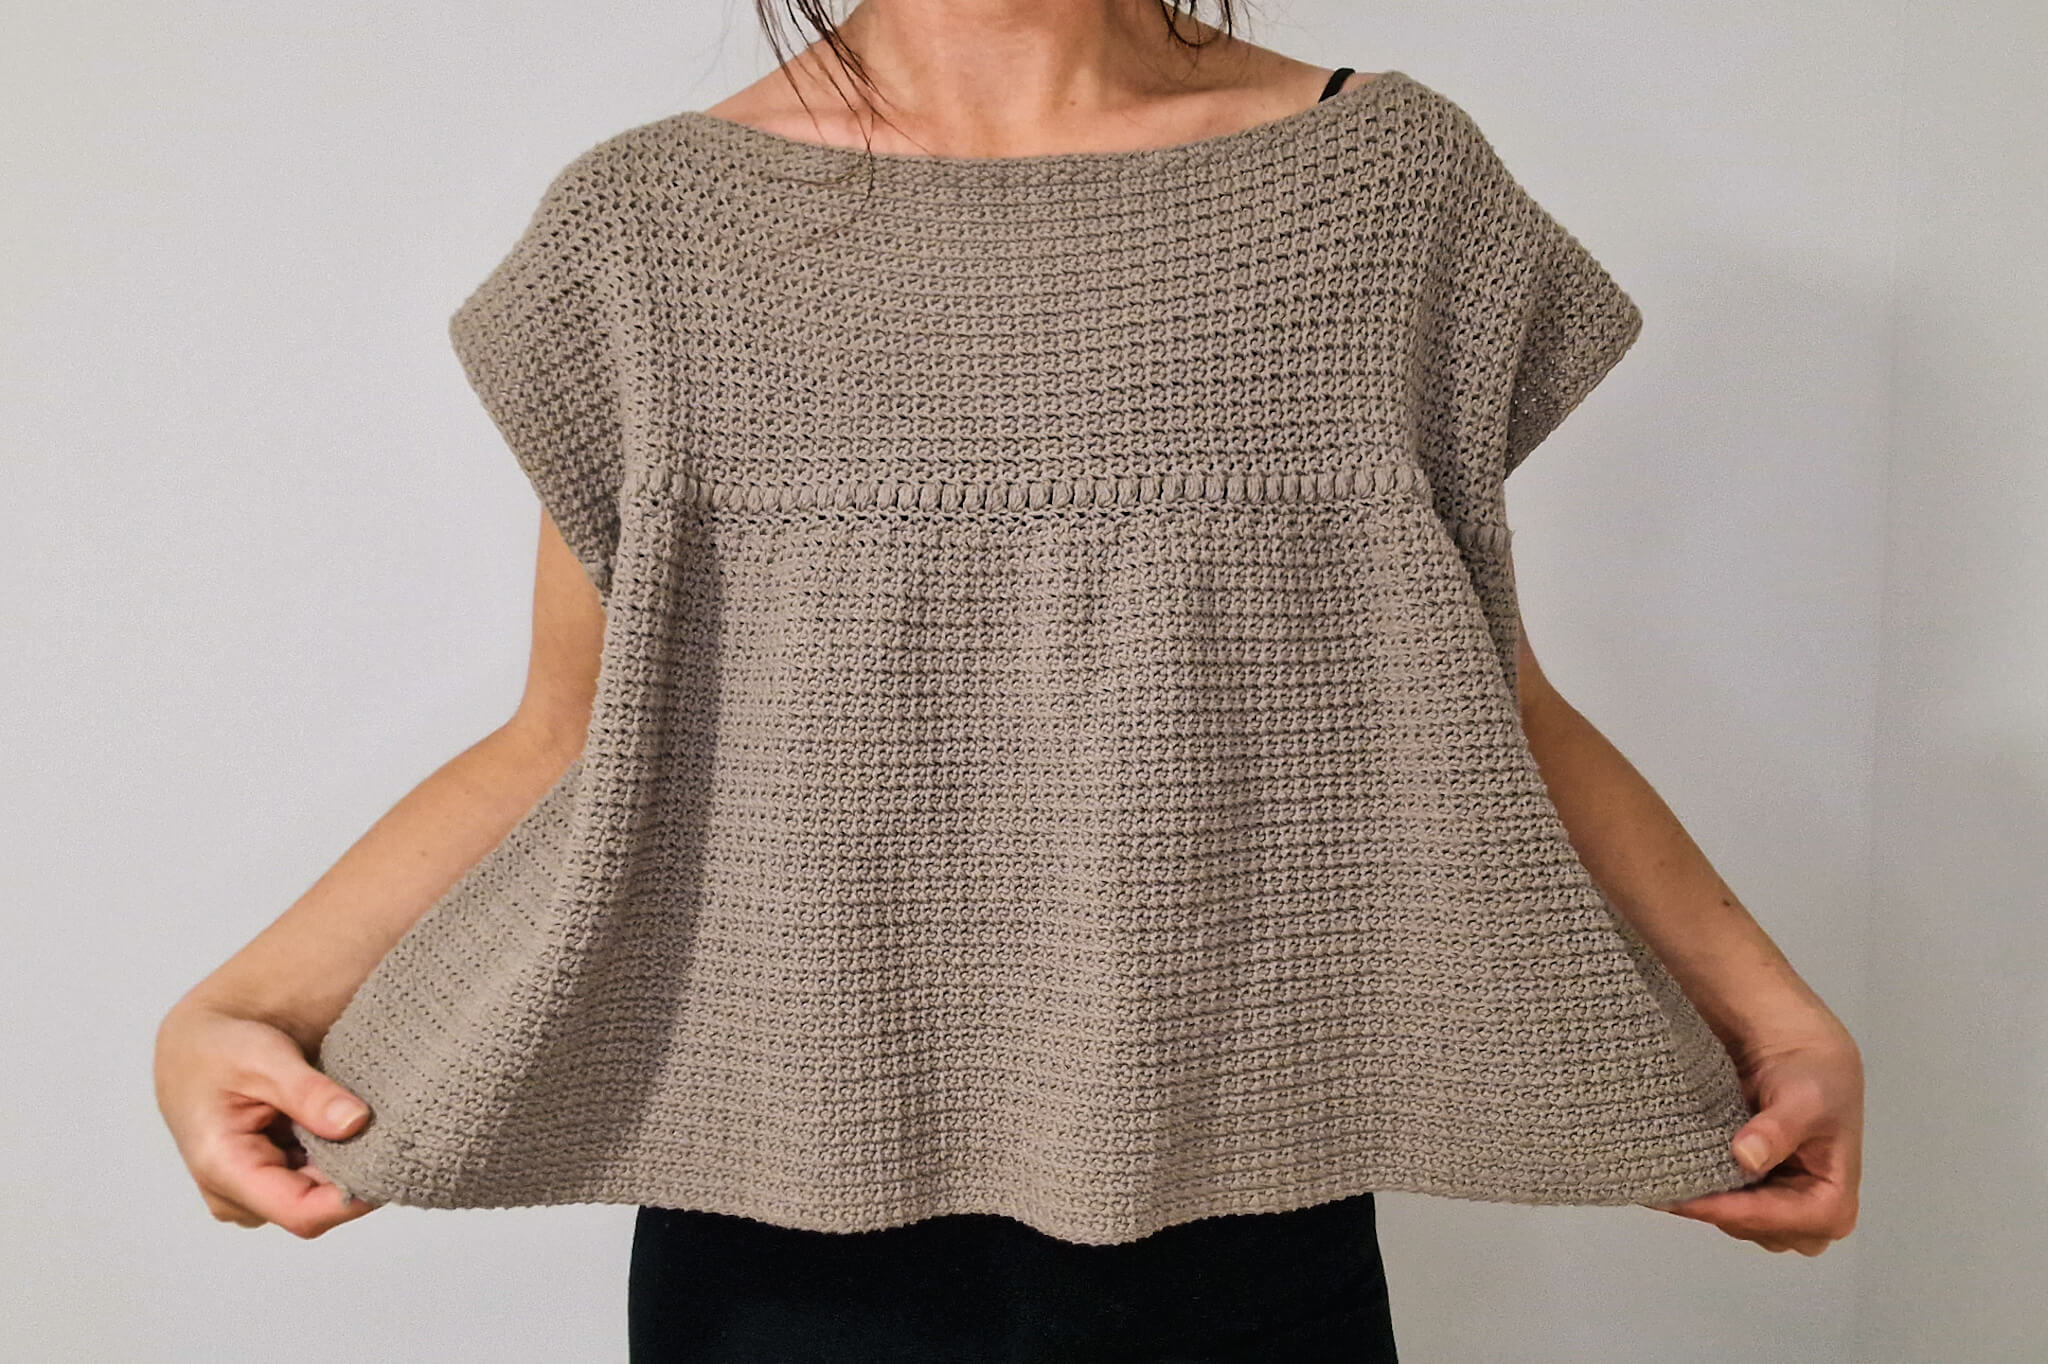 How to Crochet an Oversized Mesh Stitch Top